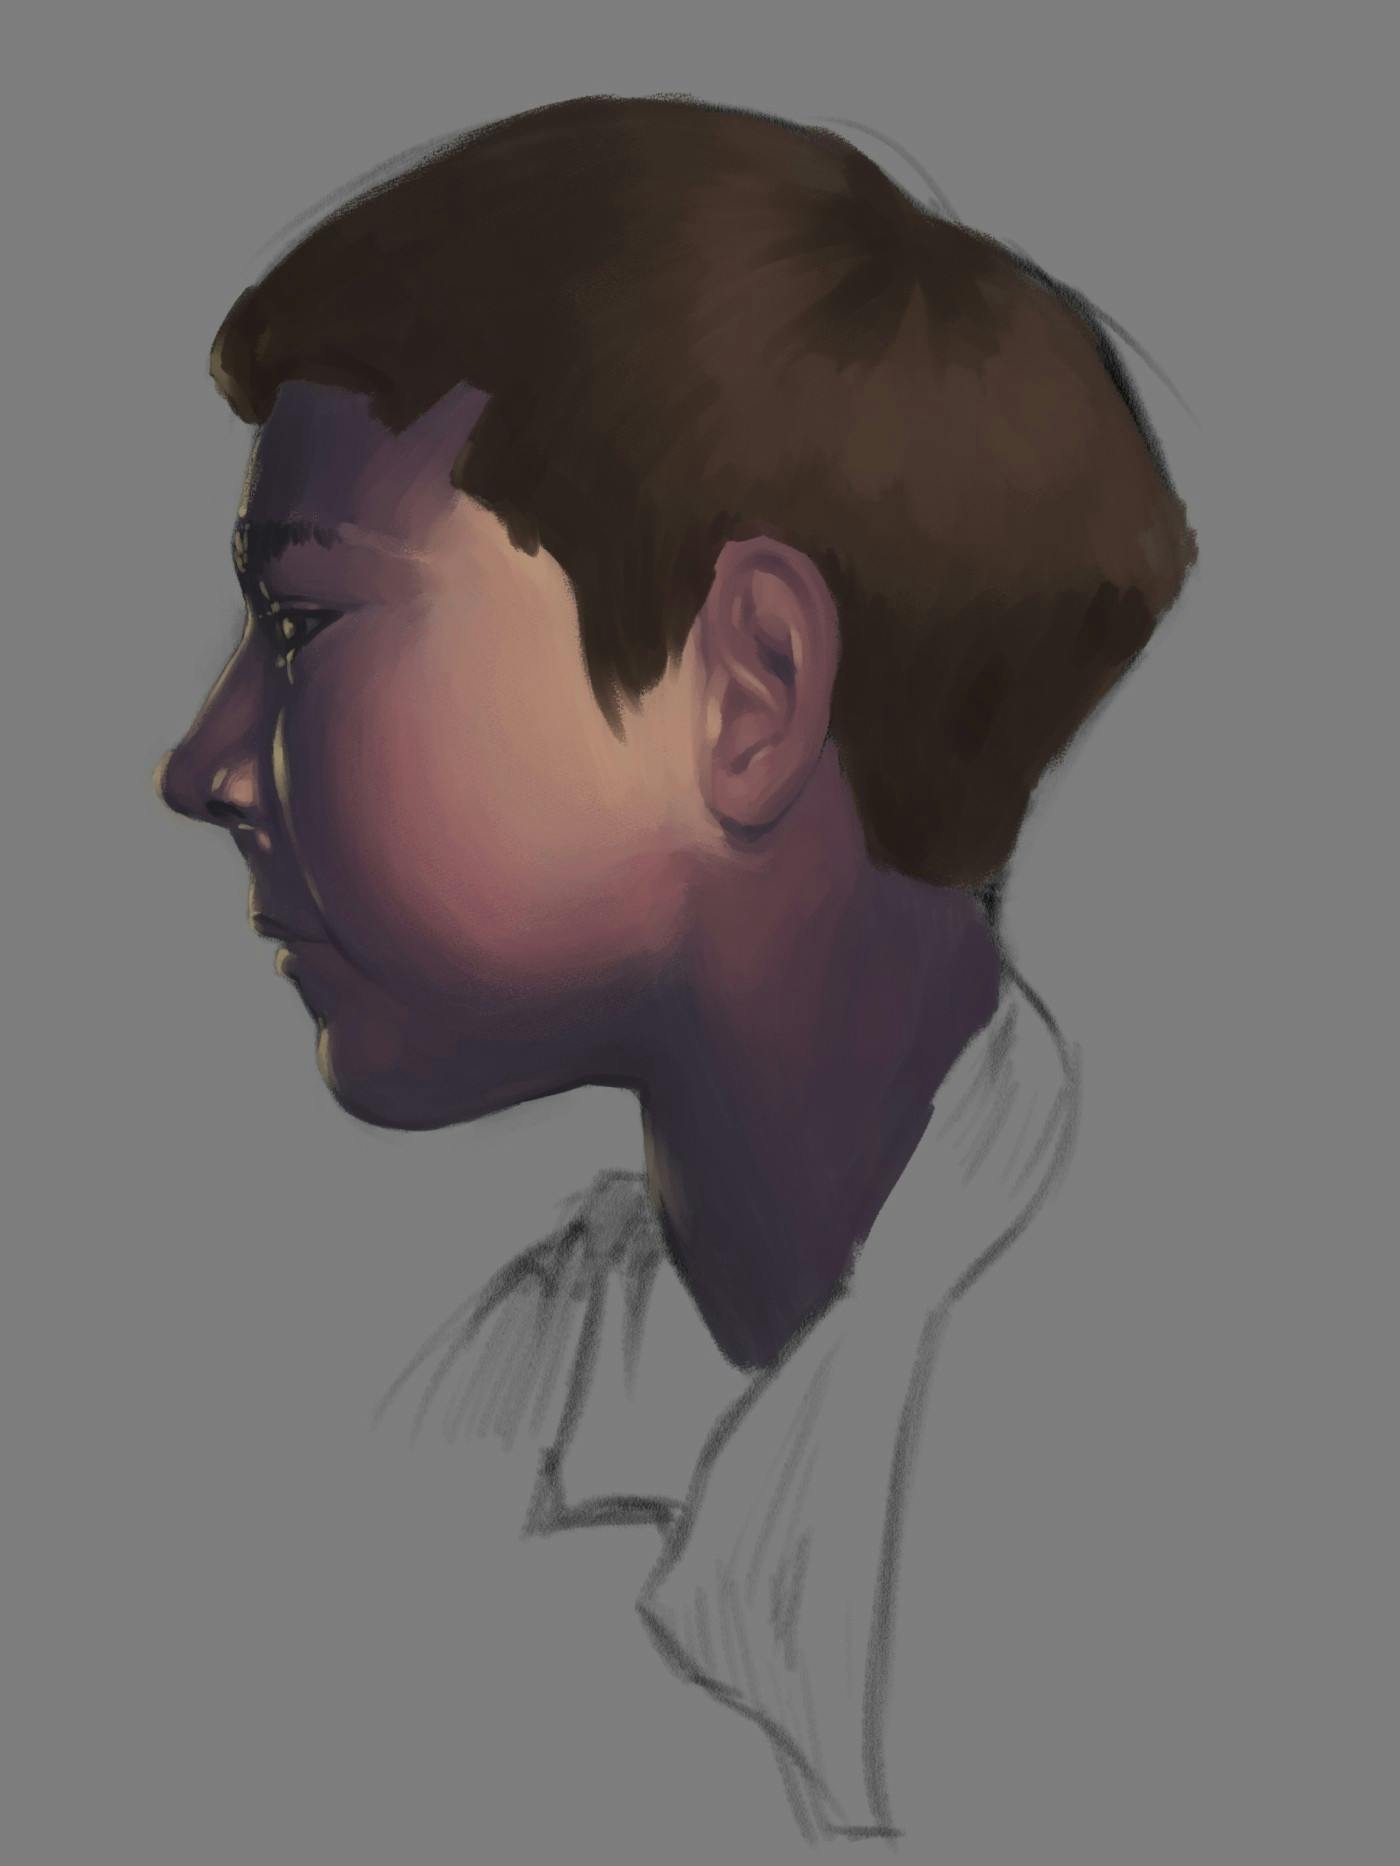 A digital sketch of a boy in profile with his skin rendered with cool purples in the shadows and warm ochre in the light.